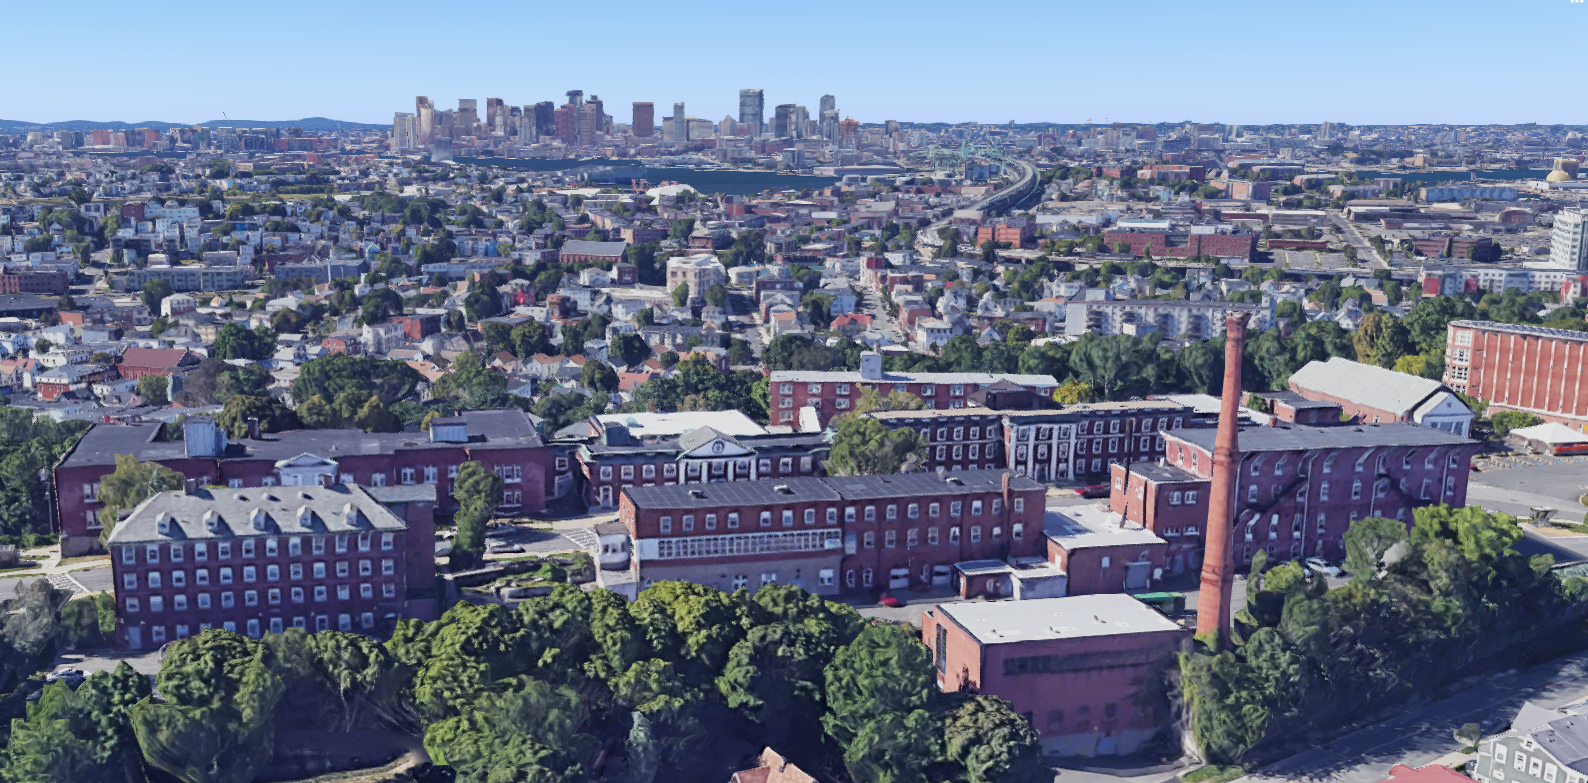 Google Earth View Of Campus